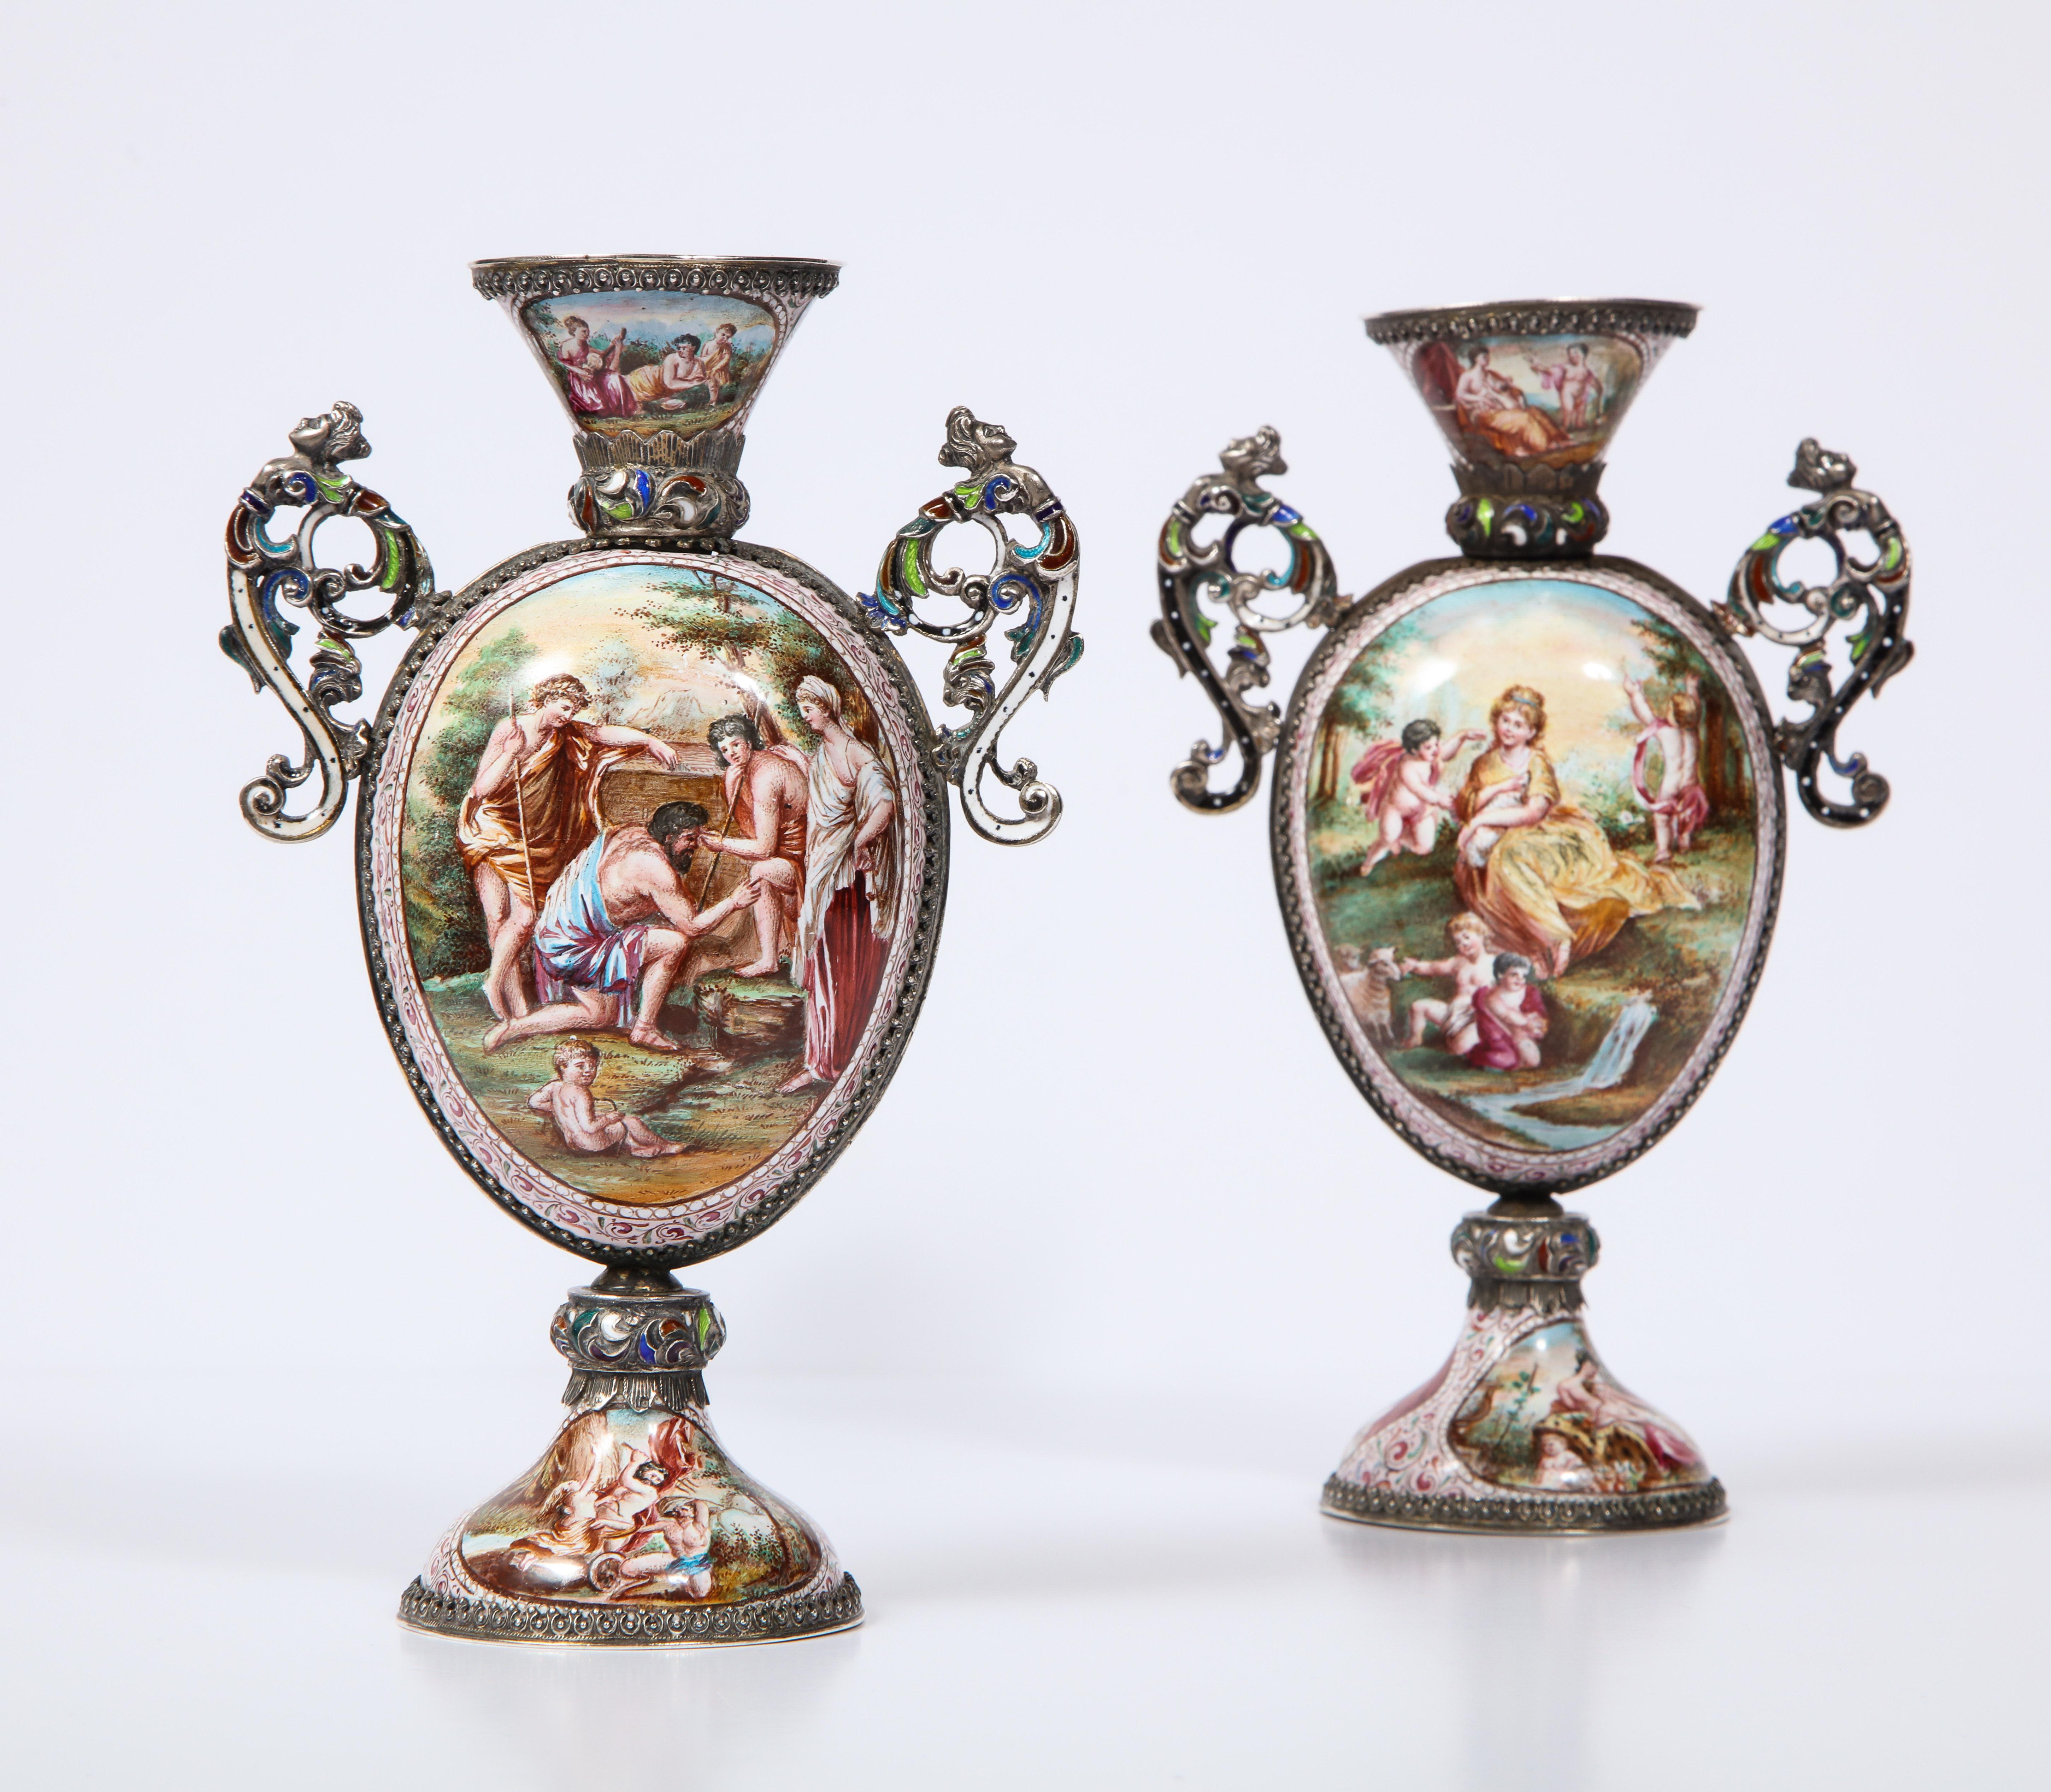 A beautifully pair of Viennese poly-chrome enamel on silver vases with mythological scenes and signed hallmarks: HB. There are a total of twelve panels, six on each vase, and each panel is exquisitely hand painted in multicolored poly-chrome enamel